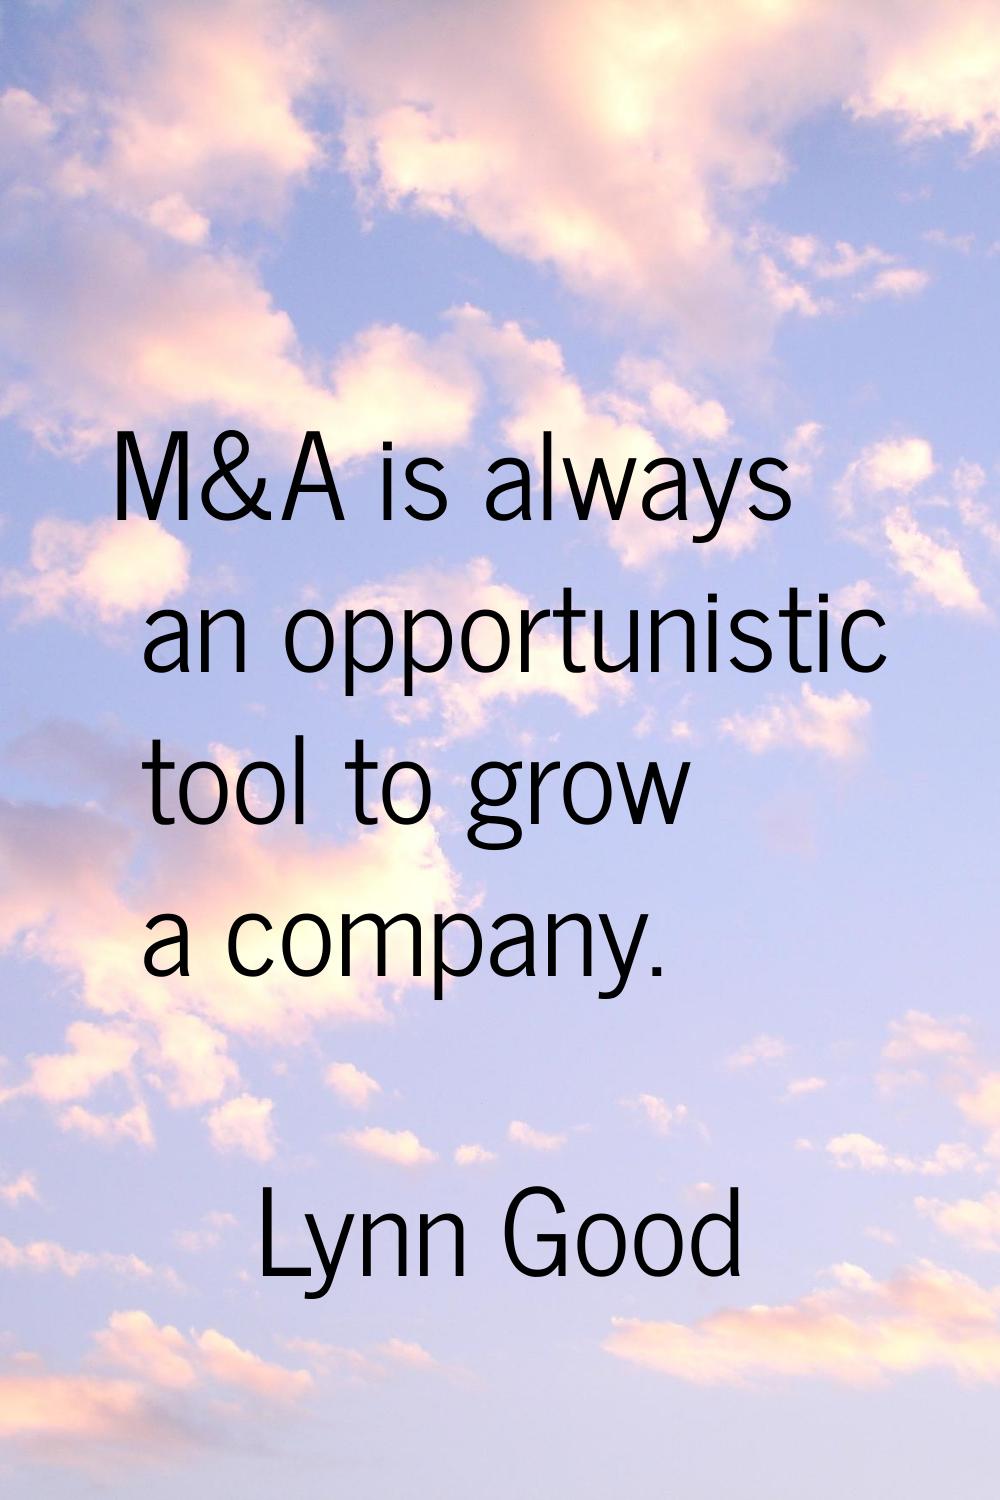 M&A is always an opportunistic tool to grow a company.